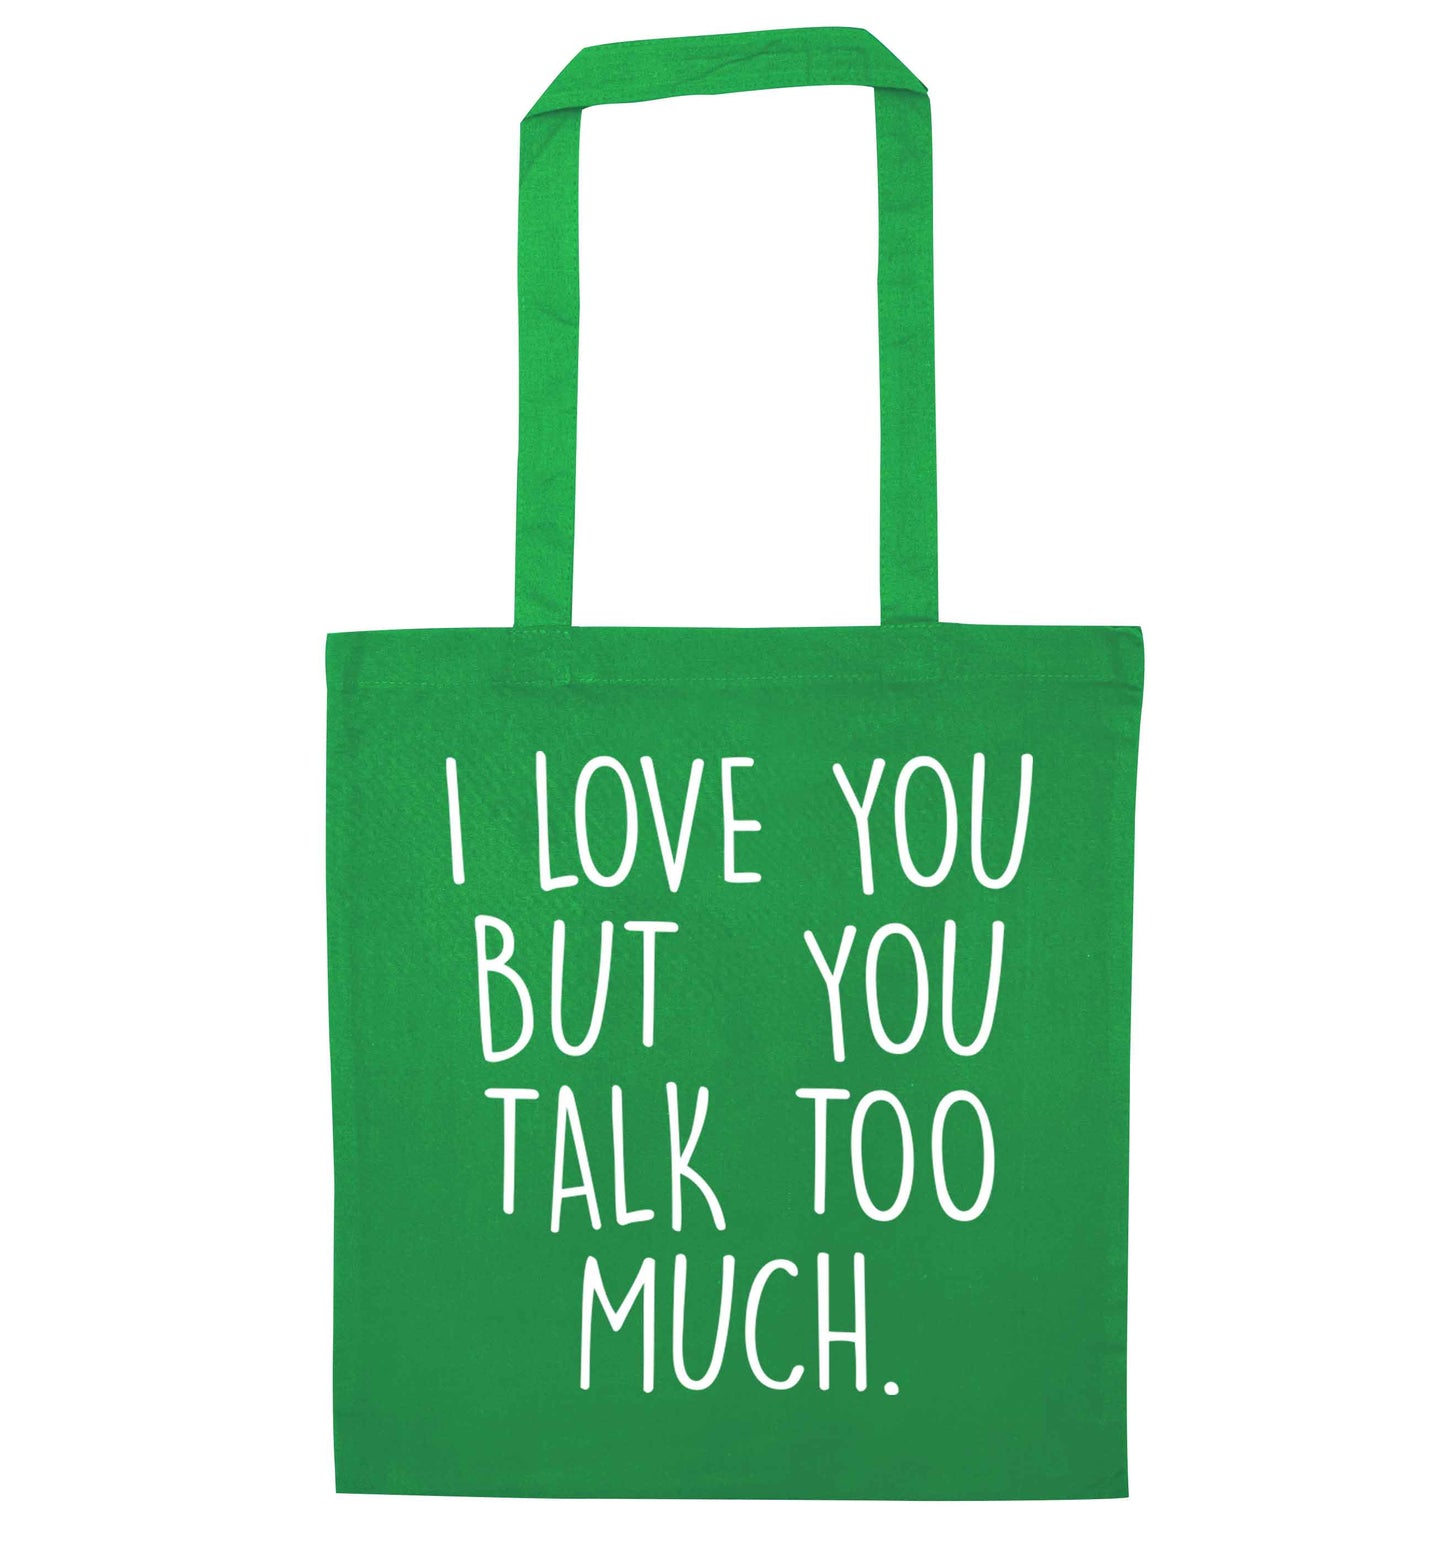 I love you but you talk too much green tote bag